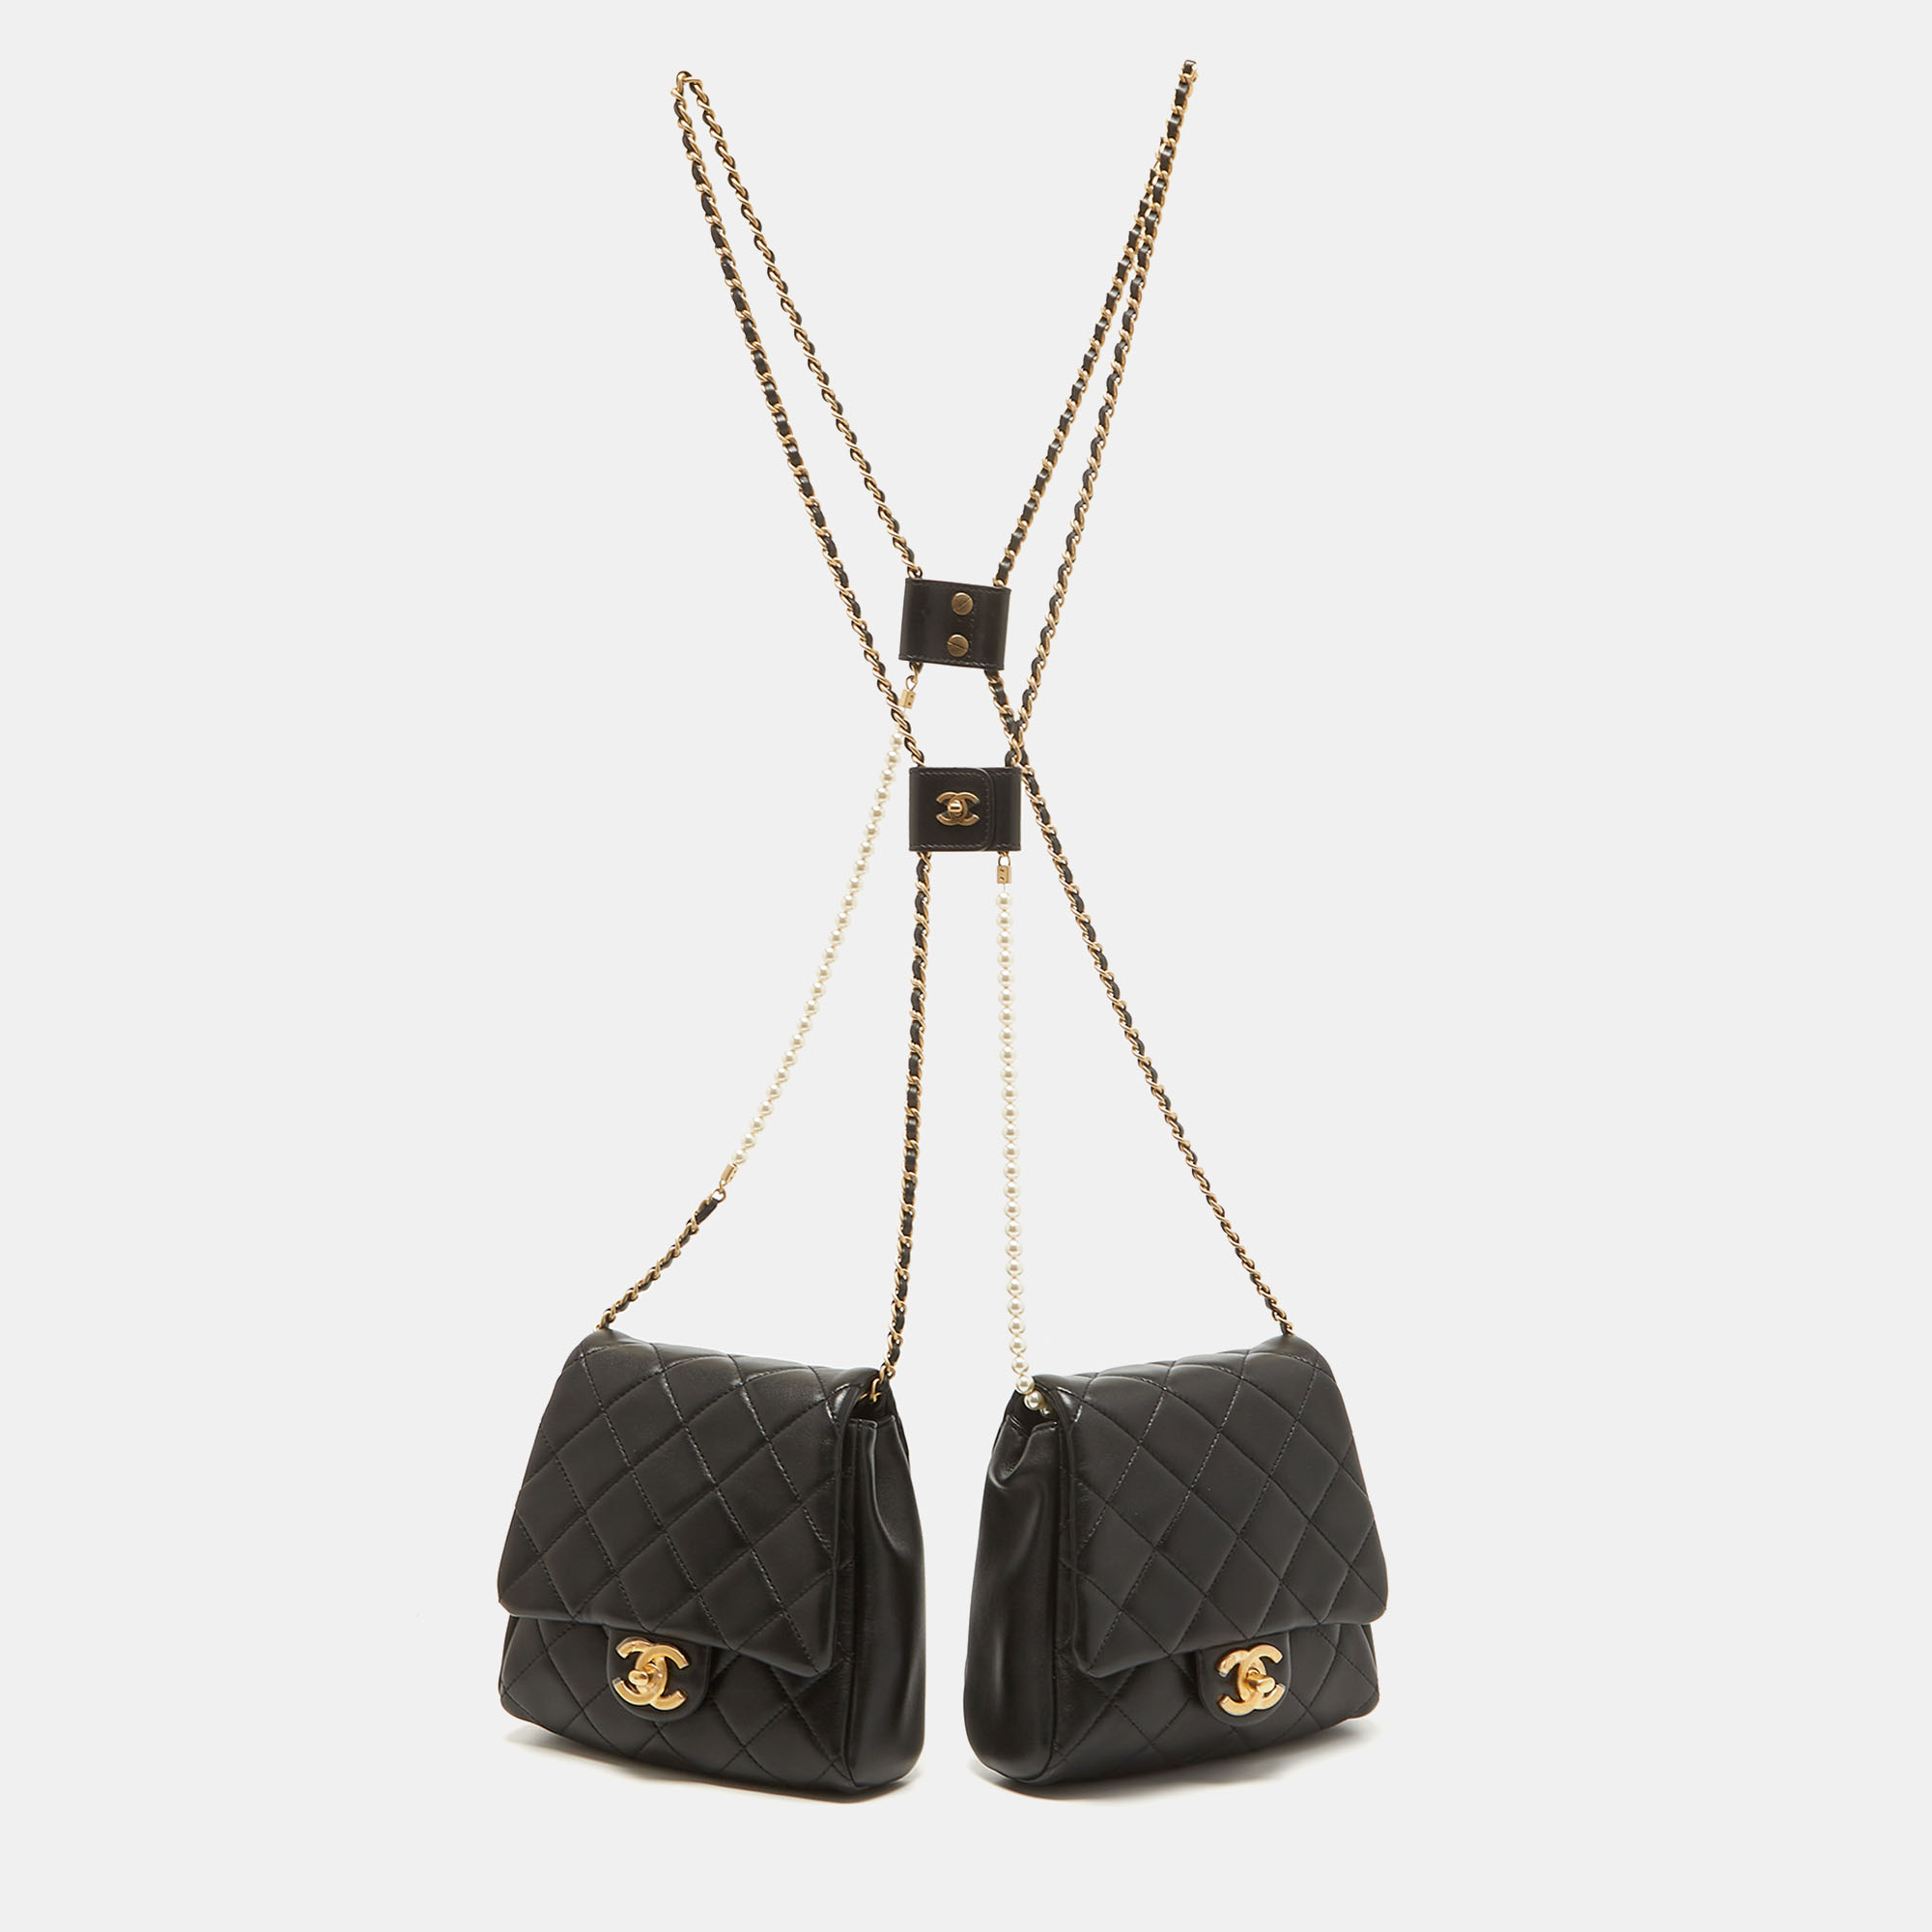 Chanel Black Quilted Leather Side-Packs Crossbody Bag Chanel | TLC